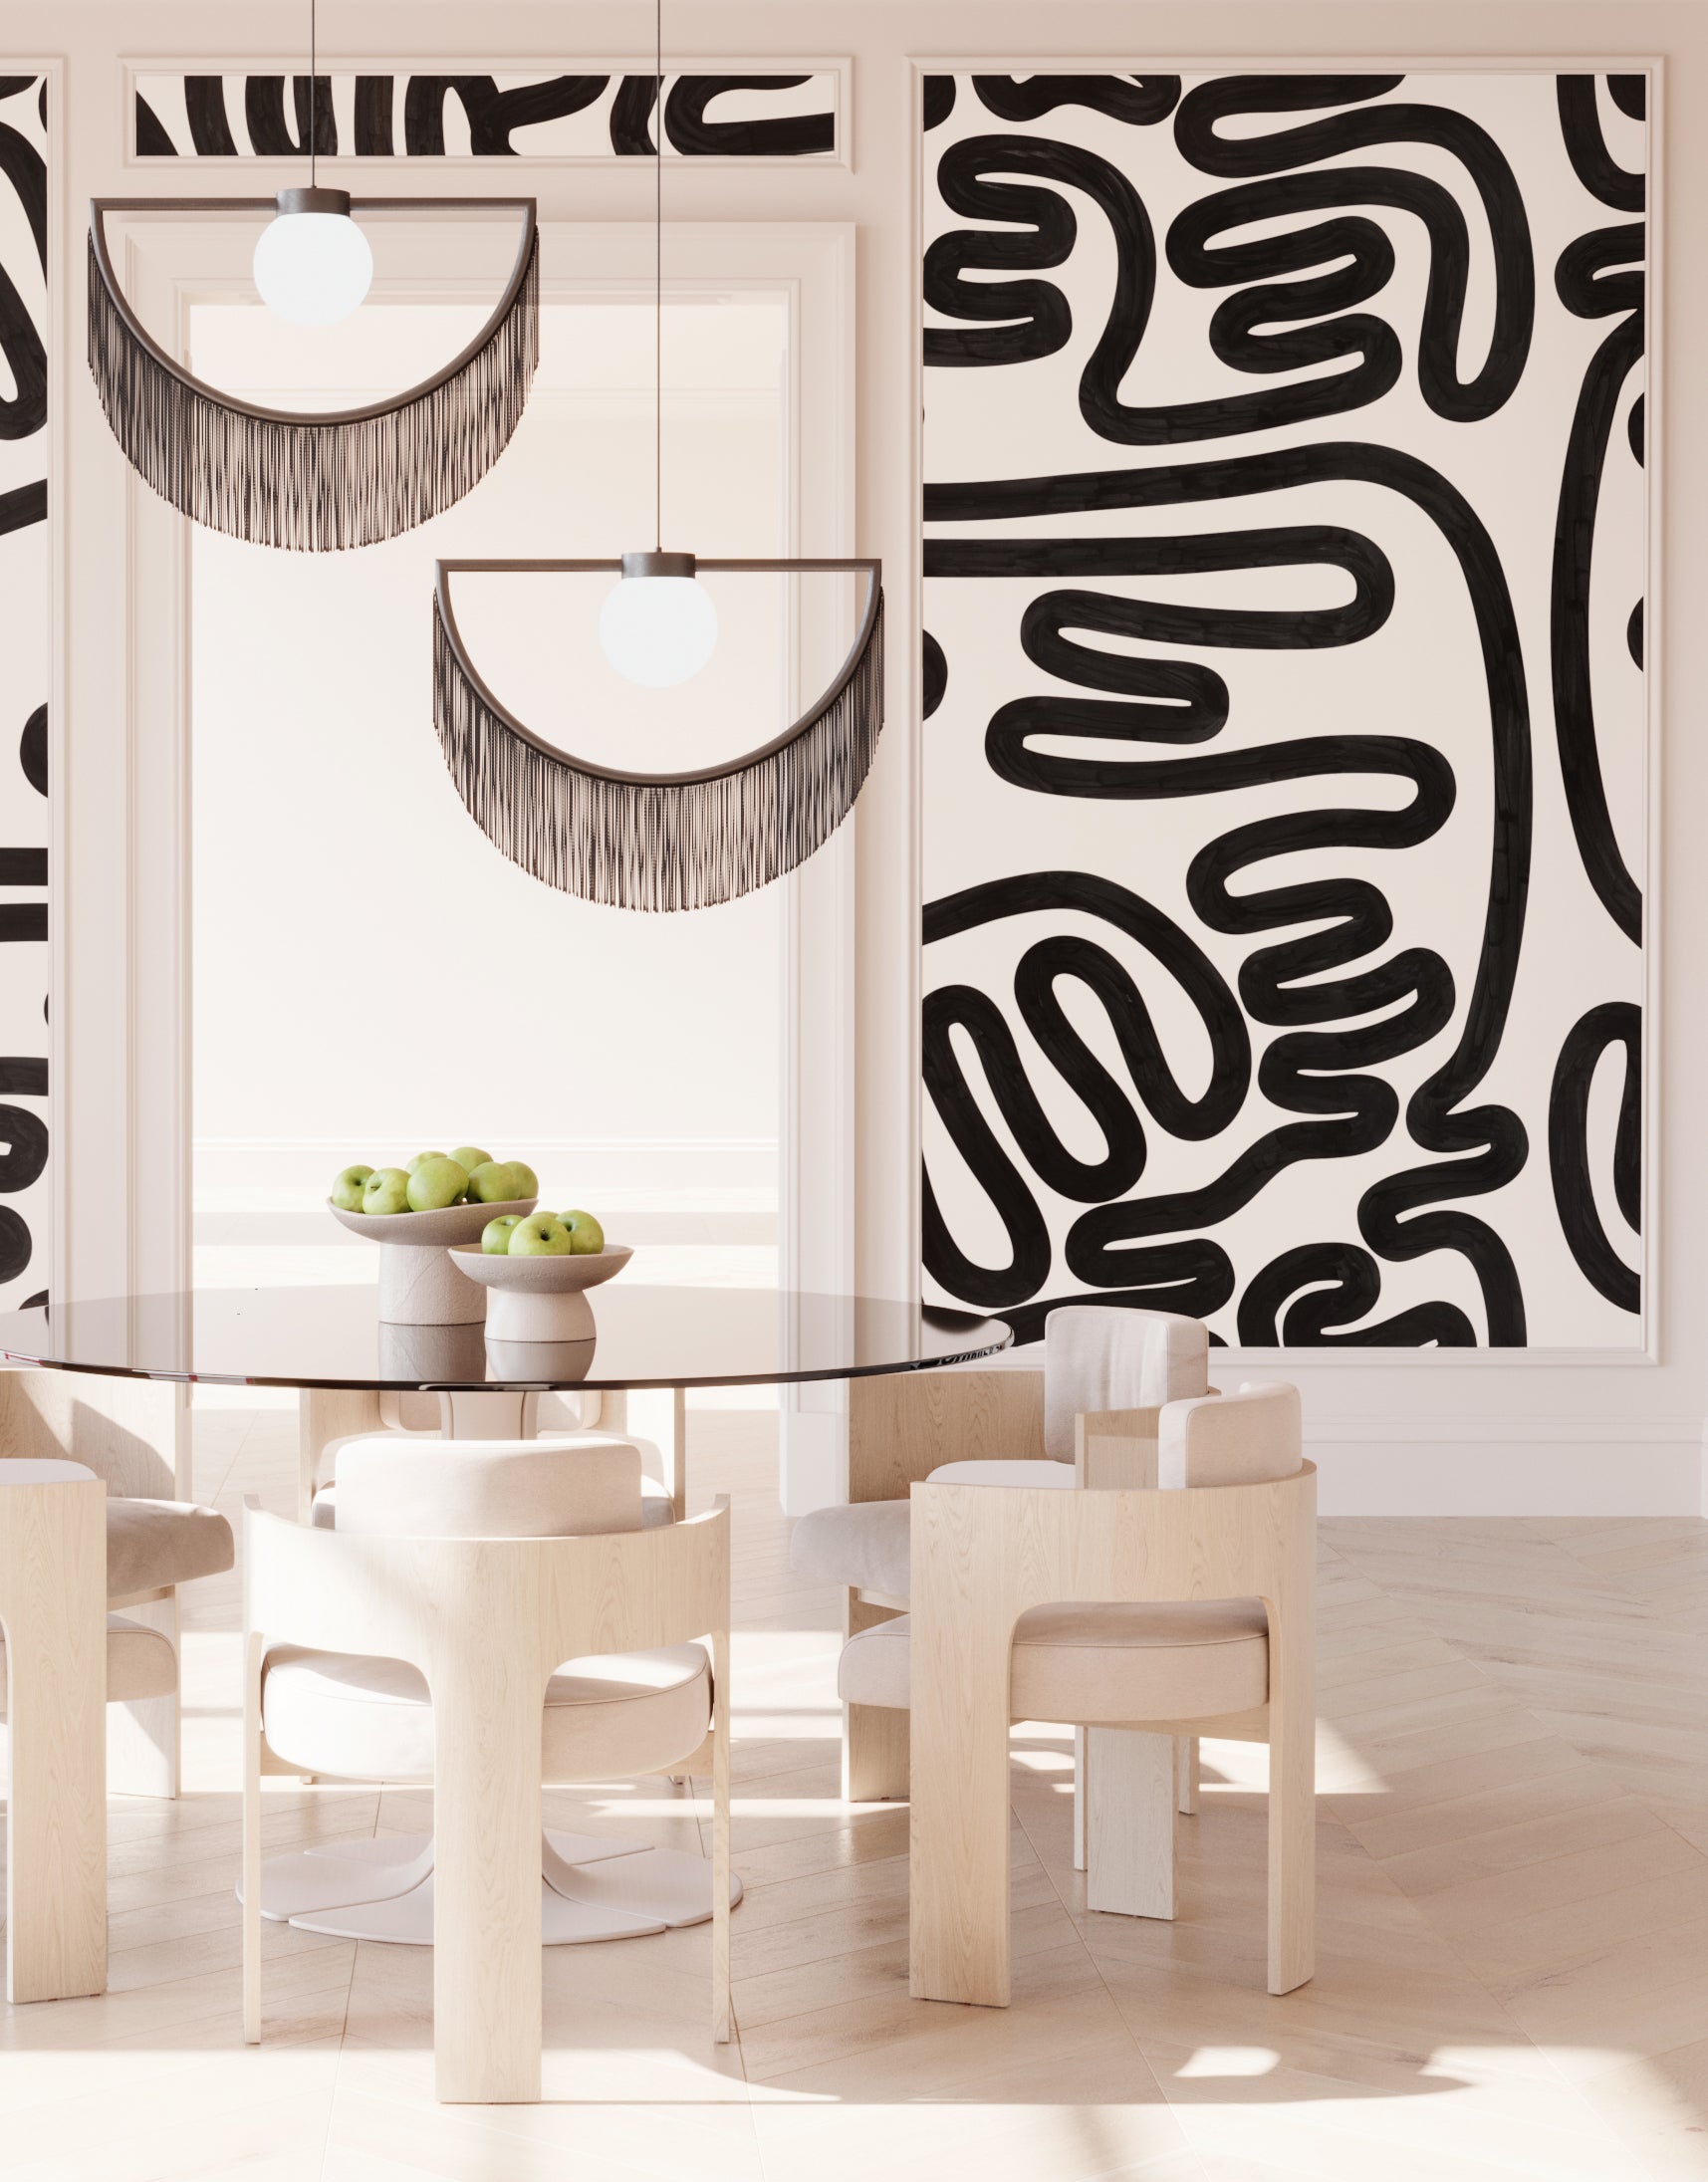 Brand new INFINITO Mural Wallpaper launched in 12 colors